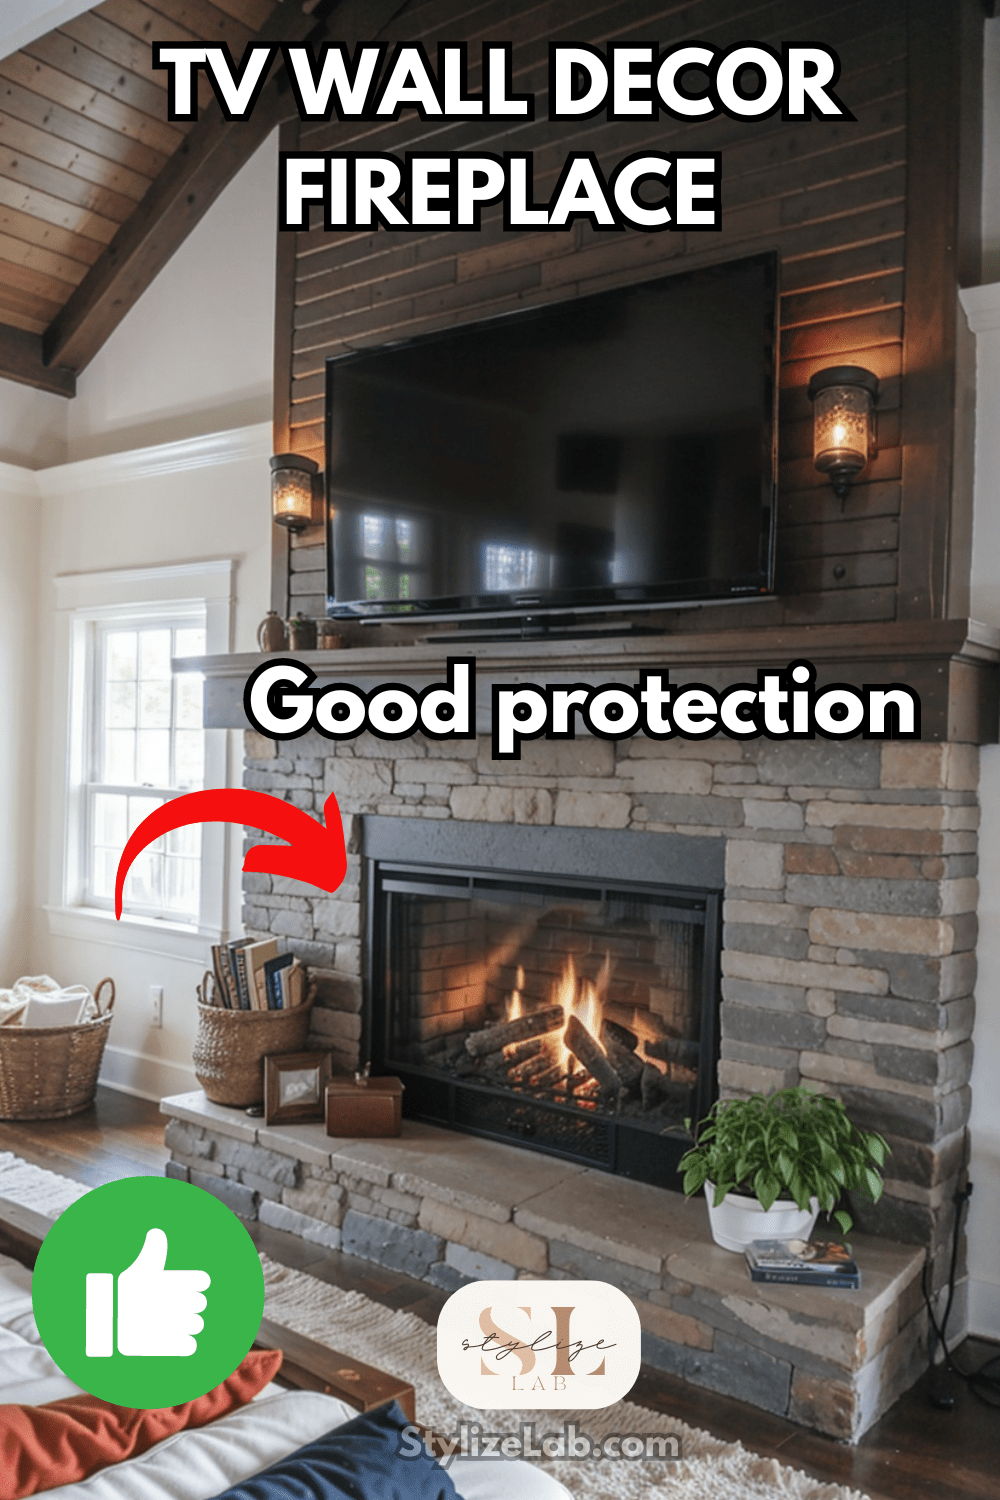 stone fireplace - tv wall decor with good protection and material